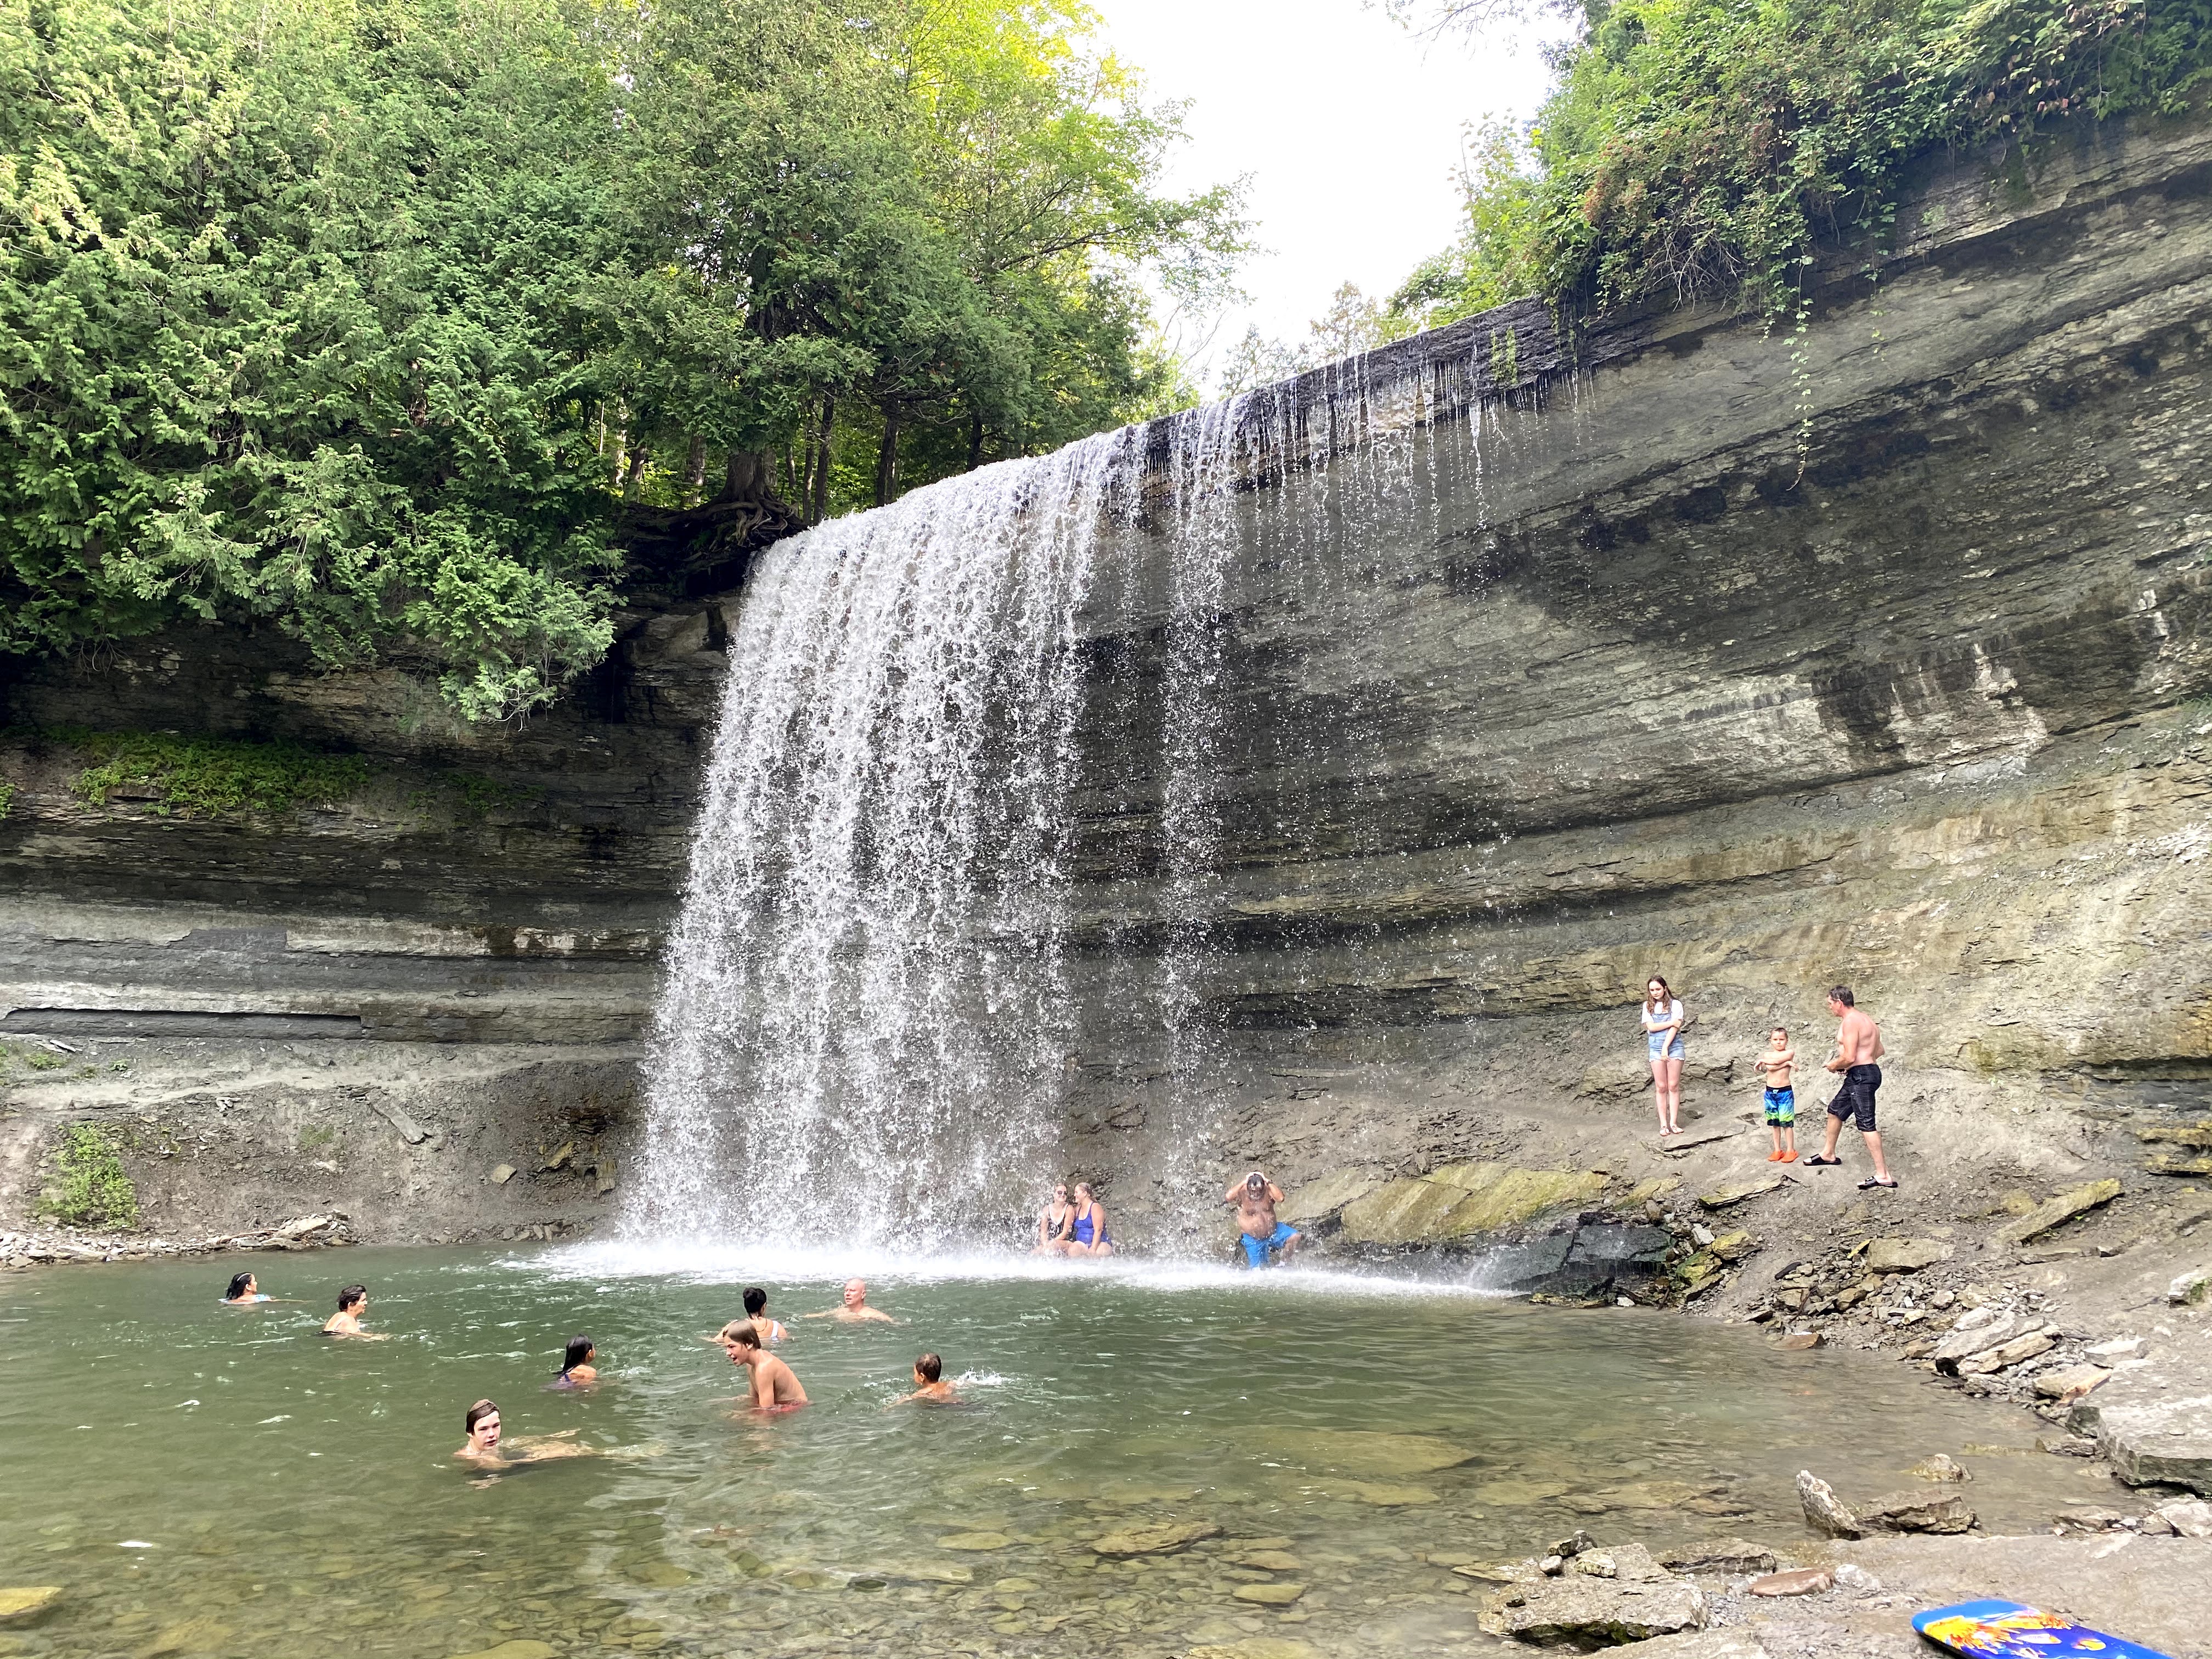 Bridal Veil Falls; a wide waterfall that pours over a treed rock cliff into a still, clear pool at the its foot. There are several bathers swimming in the pool. 